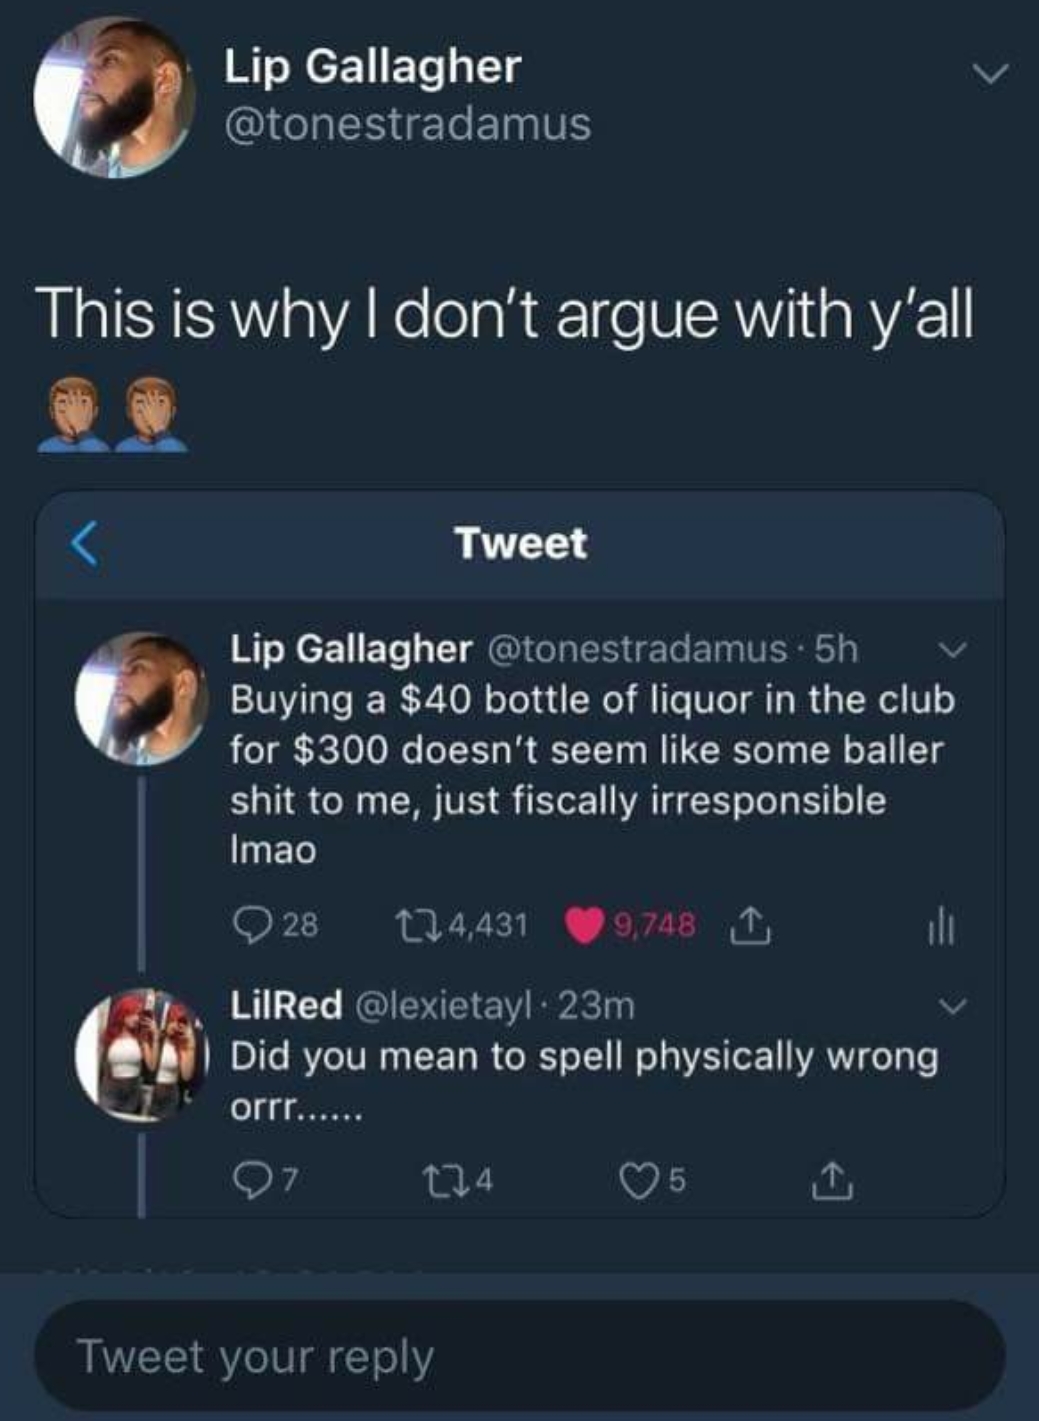 screenshot - Lip Gallagher This is why I don't argue with y'all Tweet Lip Gallagher 5h V Buying a $40 bottle of liquor in the club for $300 doesn't seem some baller shit to me, just fiscally irresponsible Imao 28 24,431 9,748 I LilRed 23m Did you mean to 